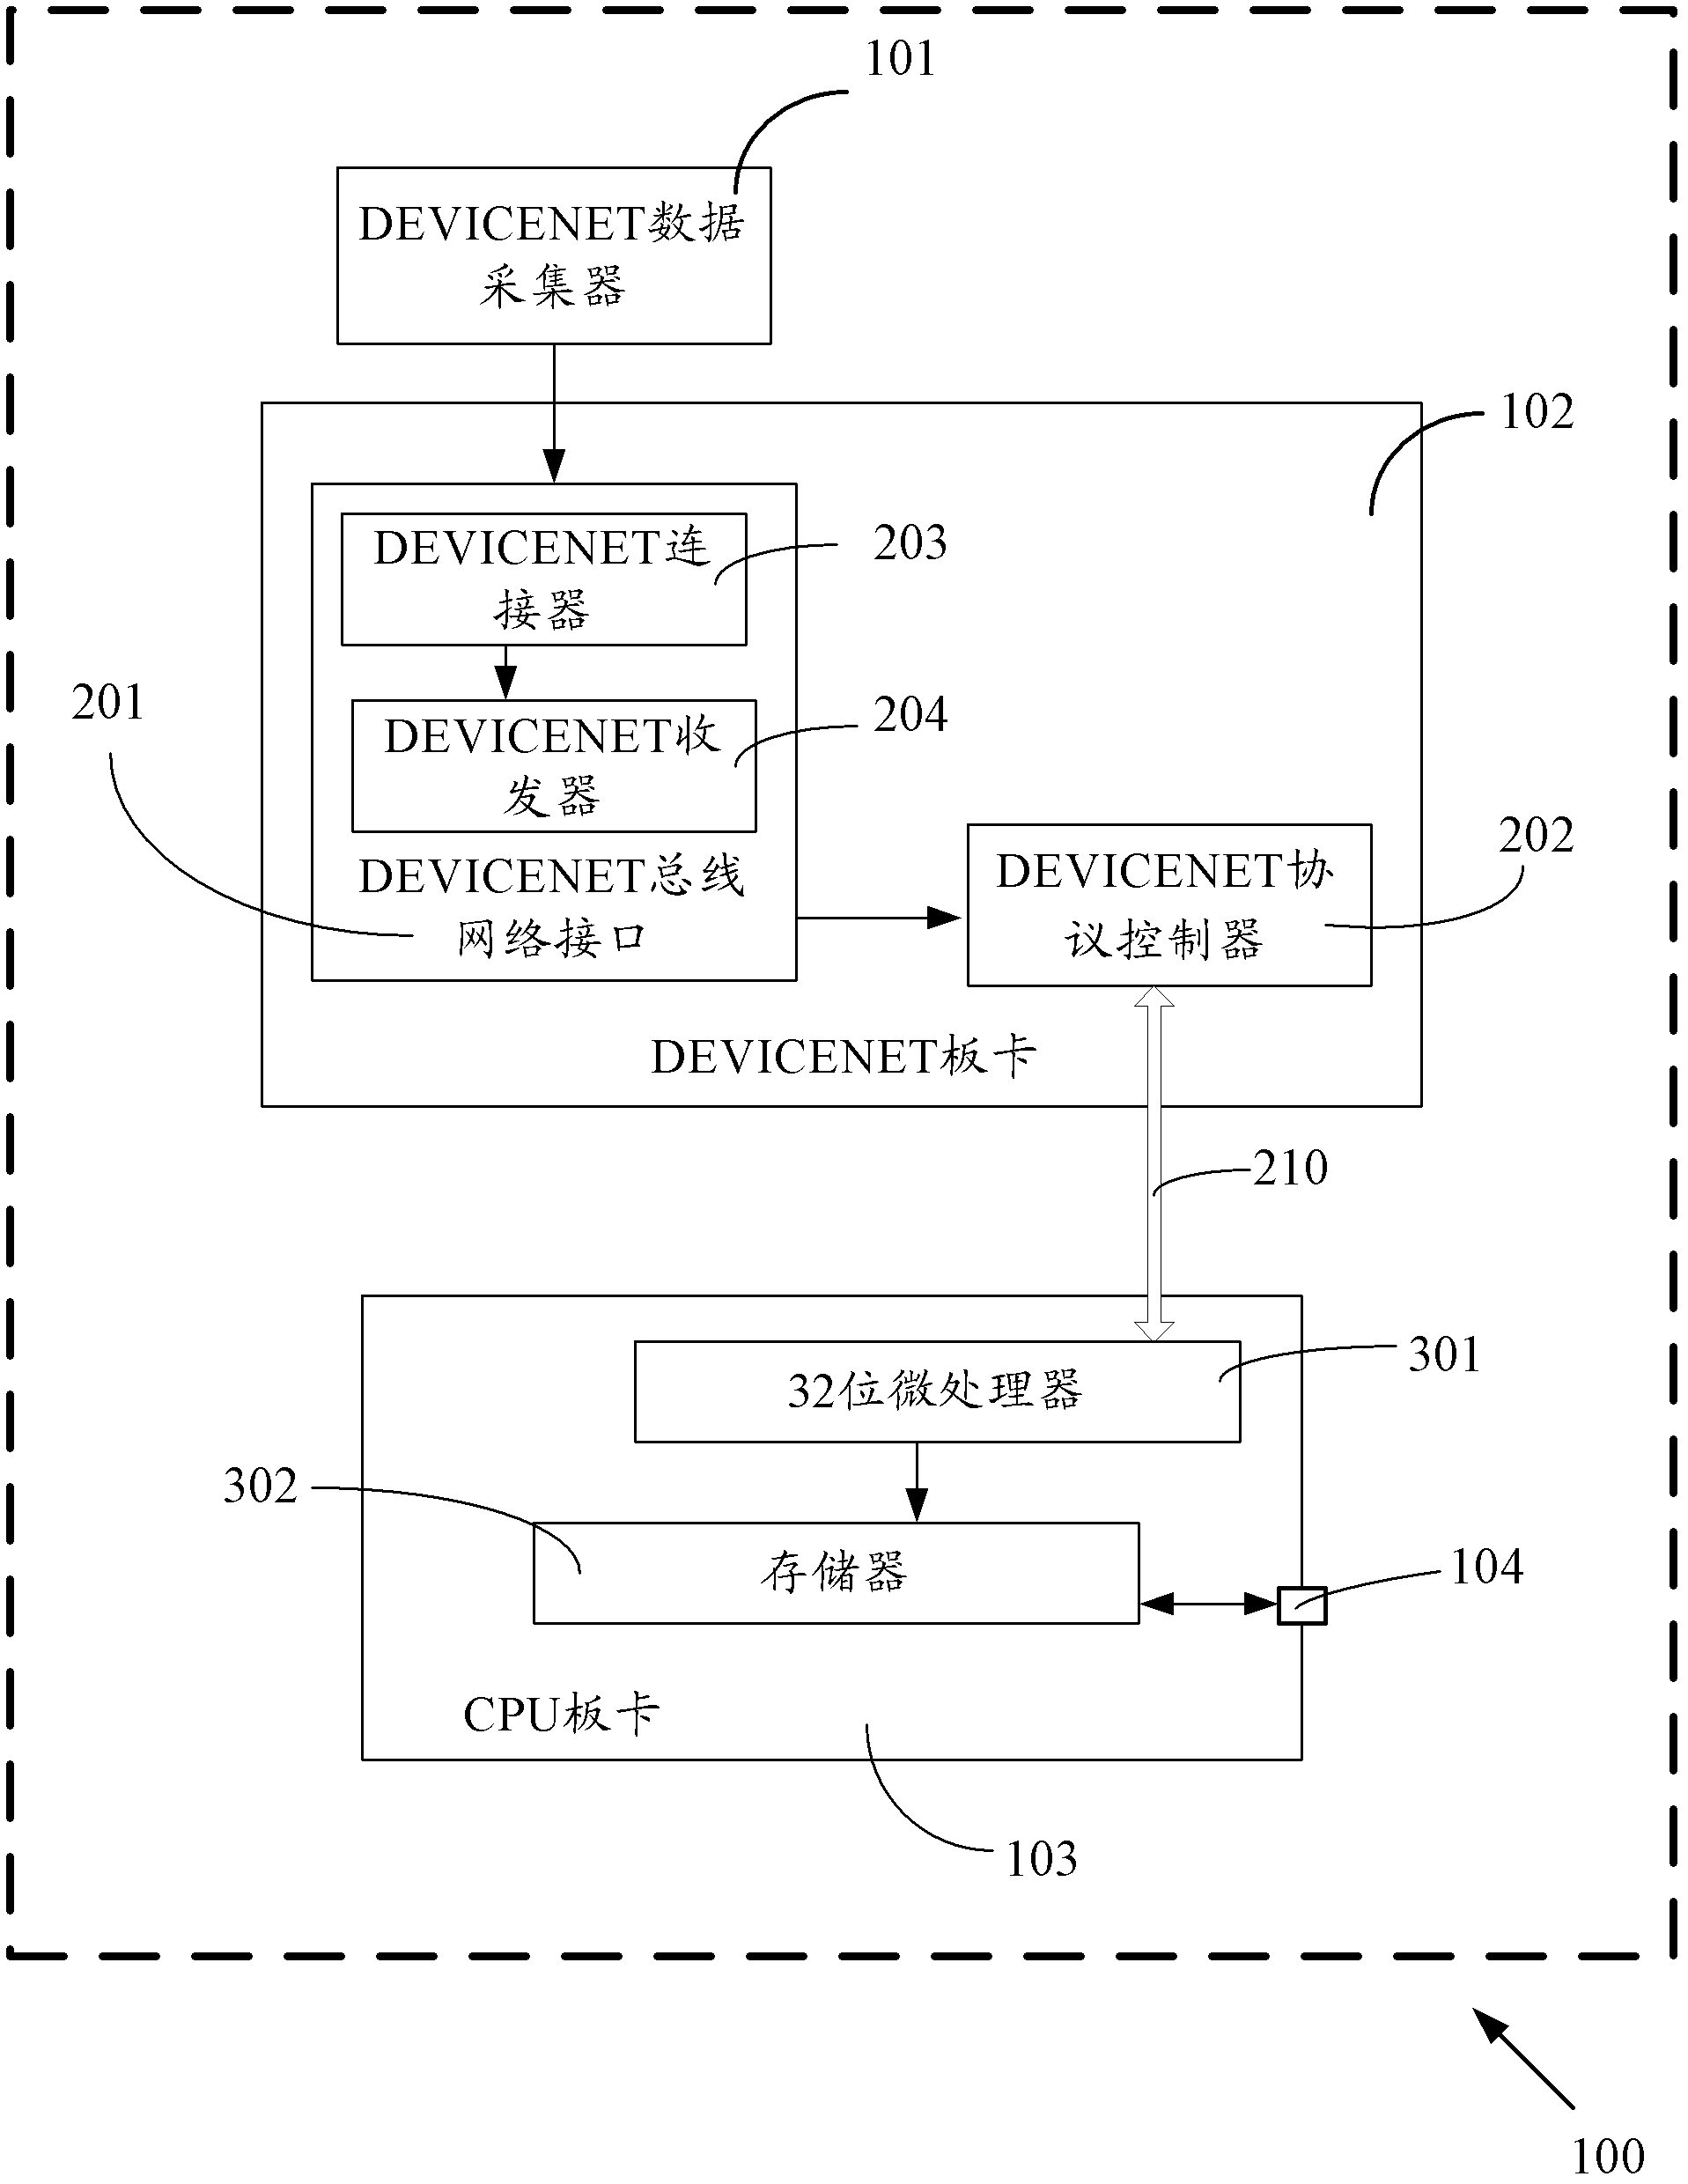 Train fault recording device and method